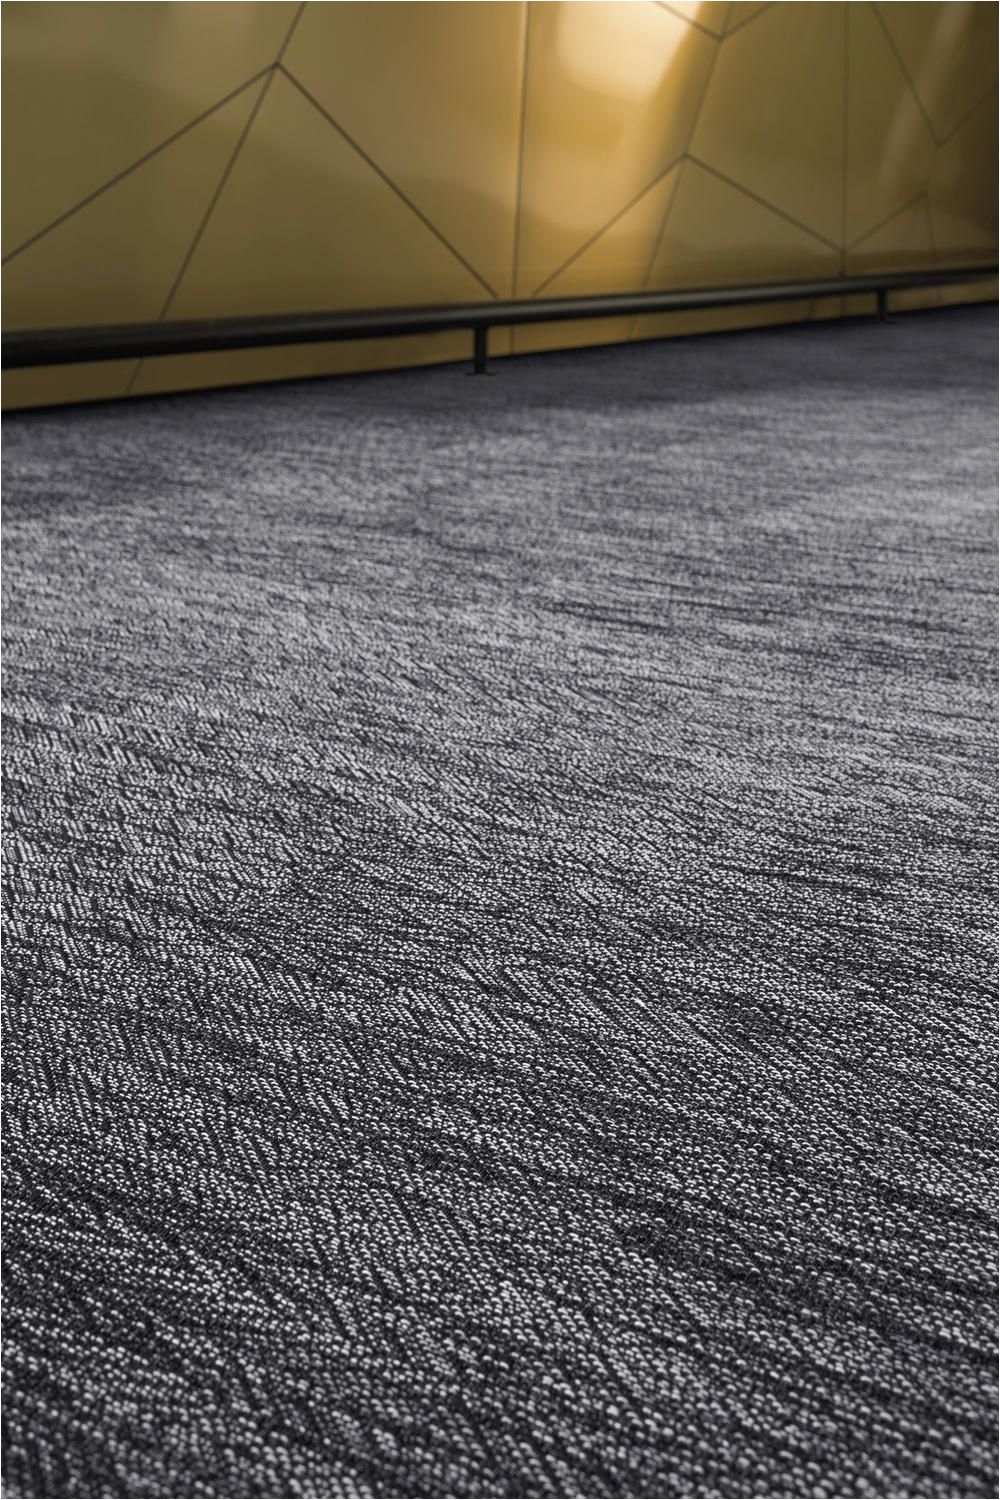 2tec2 woven vinyl flooring collection lustre obsidian black fitting unidirectional designed made in belgium